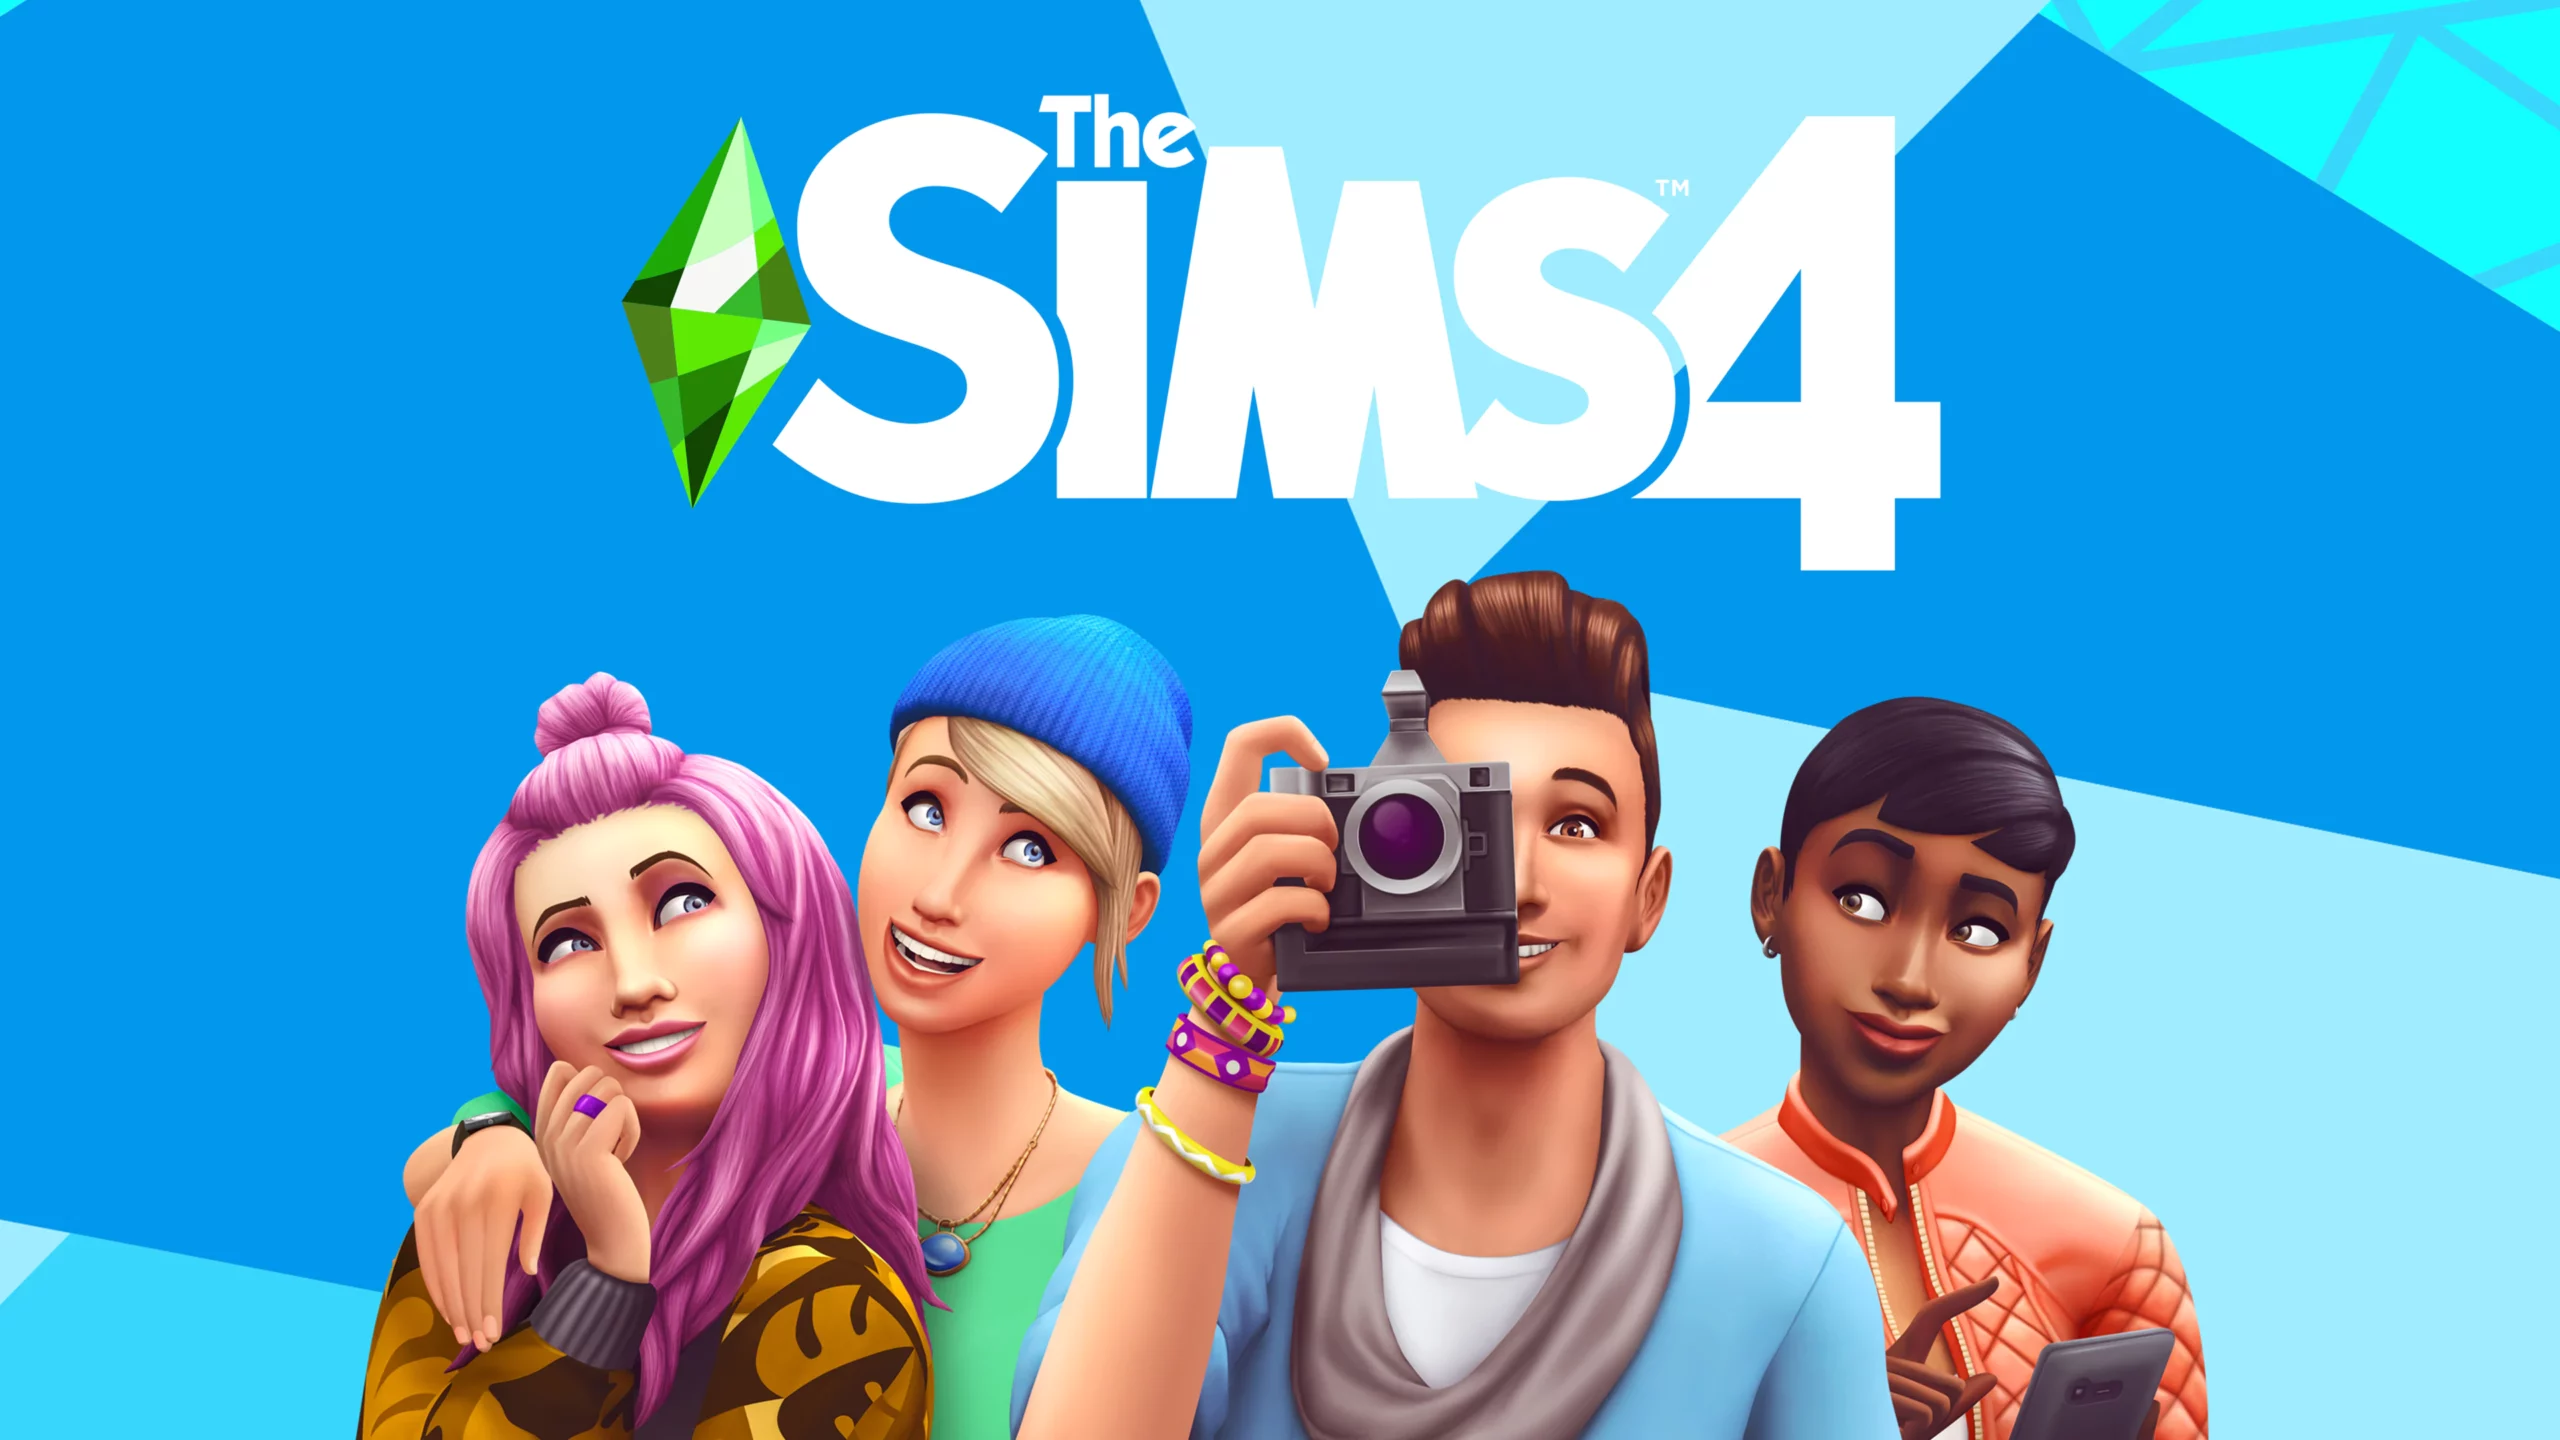 Sims 4 Not Showing Up in EA App, How to Fix?